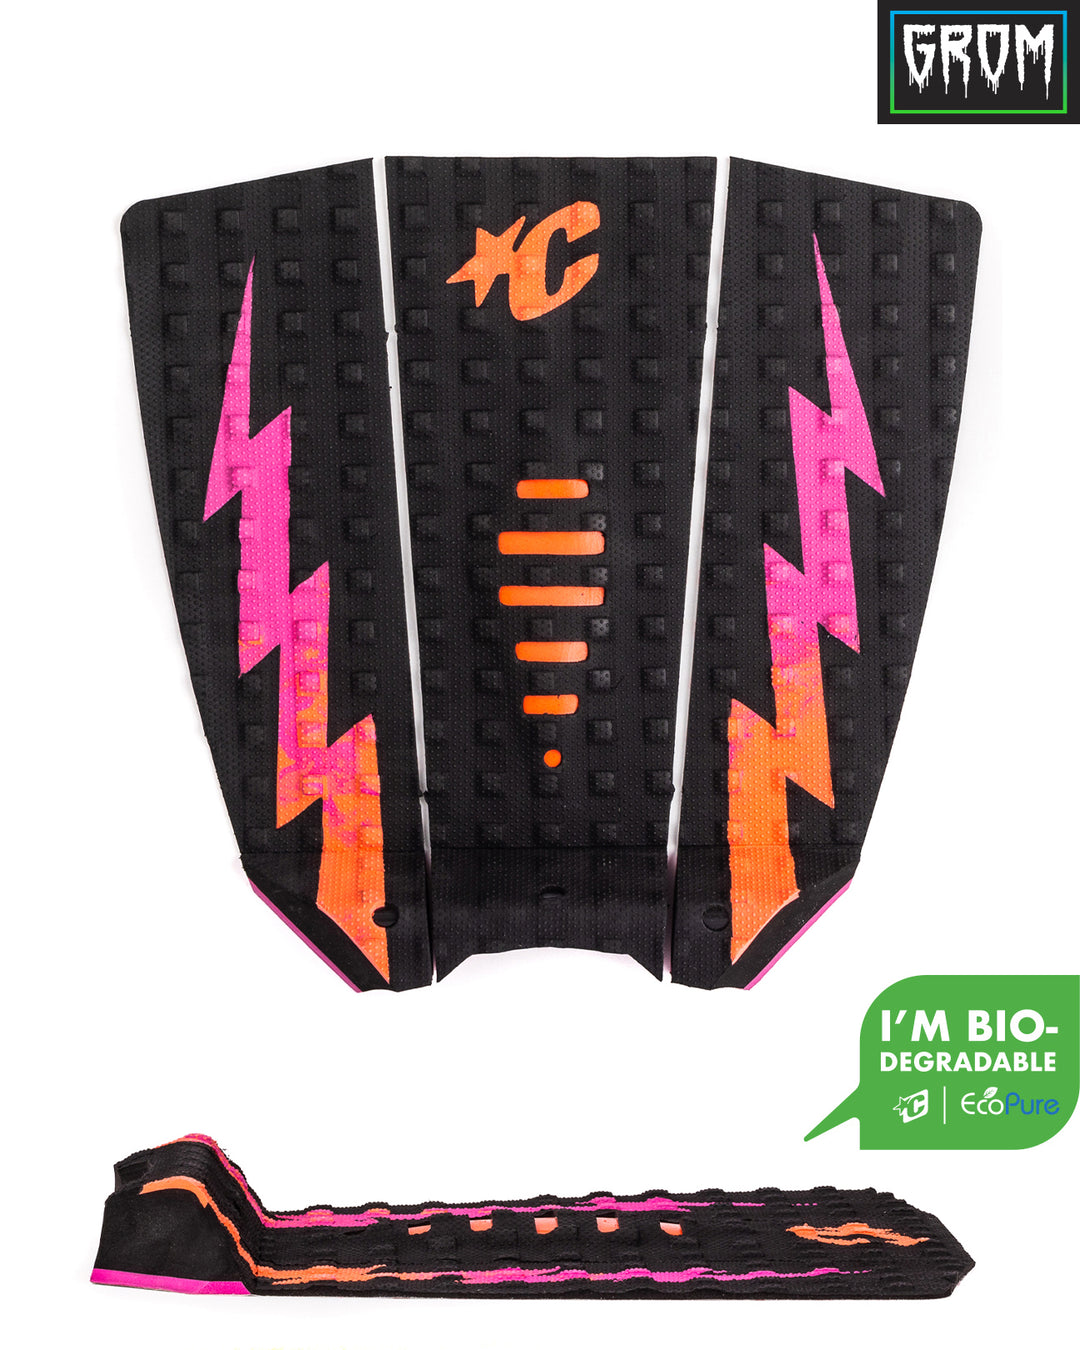 Grom Mick Eugene Fanning Lite Ecopure Traction Pad